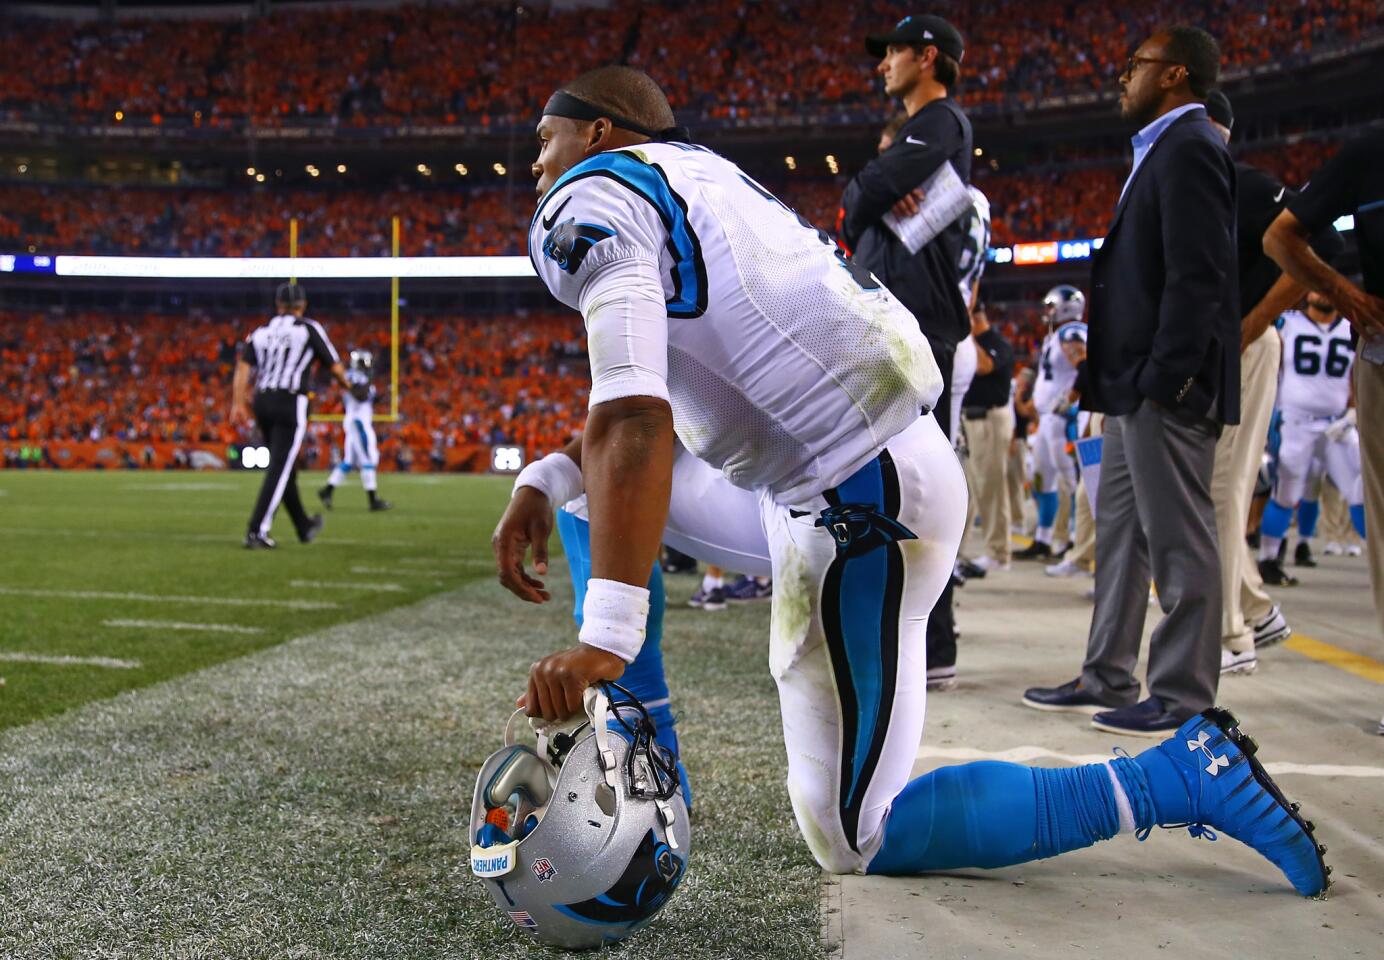 Sep 8, 2016; Denver, CO, USA; Carolina Panthers quarterback Cam Newton (1) reacts in the closing seconds of the game against the Denver Broncos at Sports Authority Field at Mile High. The Broncos defeated the Panthers 21-20. Mandatory Credit: Mark J. Rebilas-USA TODAY Sports ** Usable by SD ONLY **